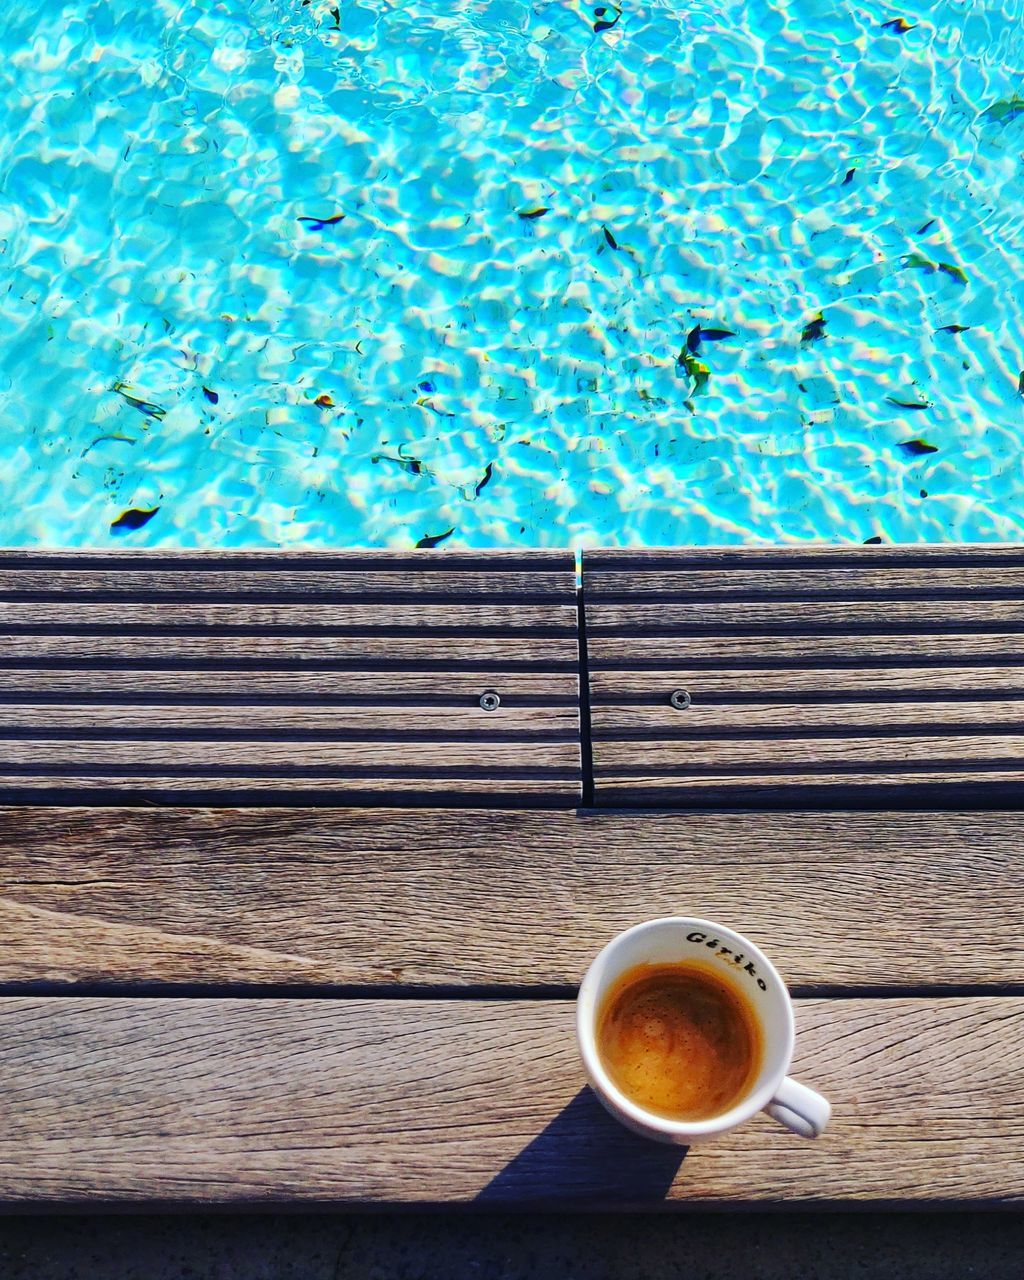 drink, refreshment, swimming pool, food and drink, pool, cup, coffee, coffee - drink, water, directly above, mug, blue, coffee cup, day, freshness, high angle view, poolside, wood - material, nature, outdoors, no people, non-alcoholic beverage, crockery